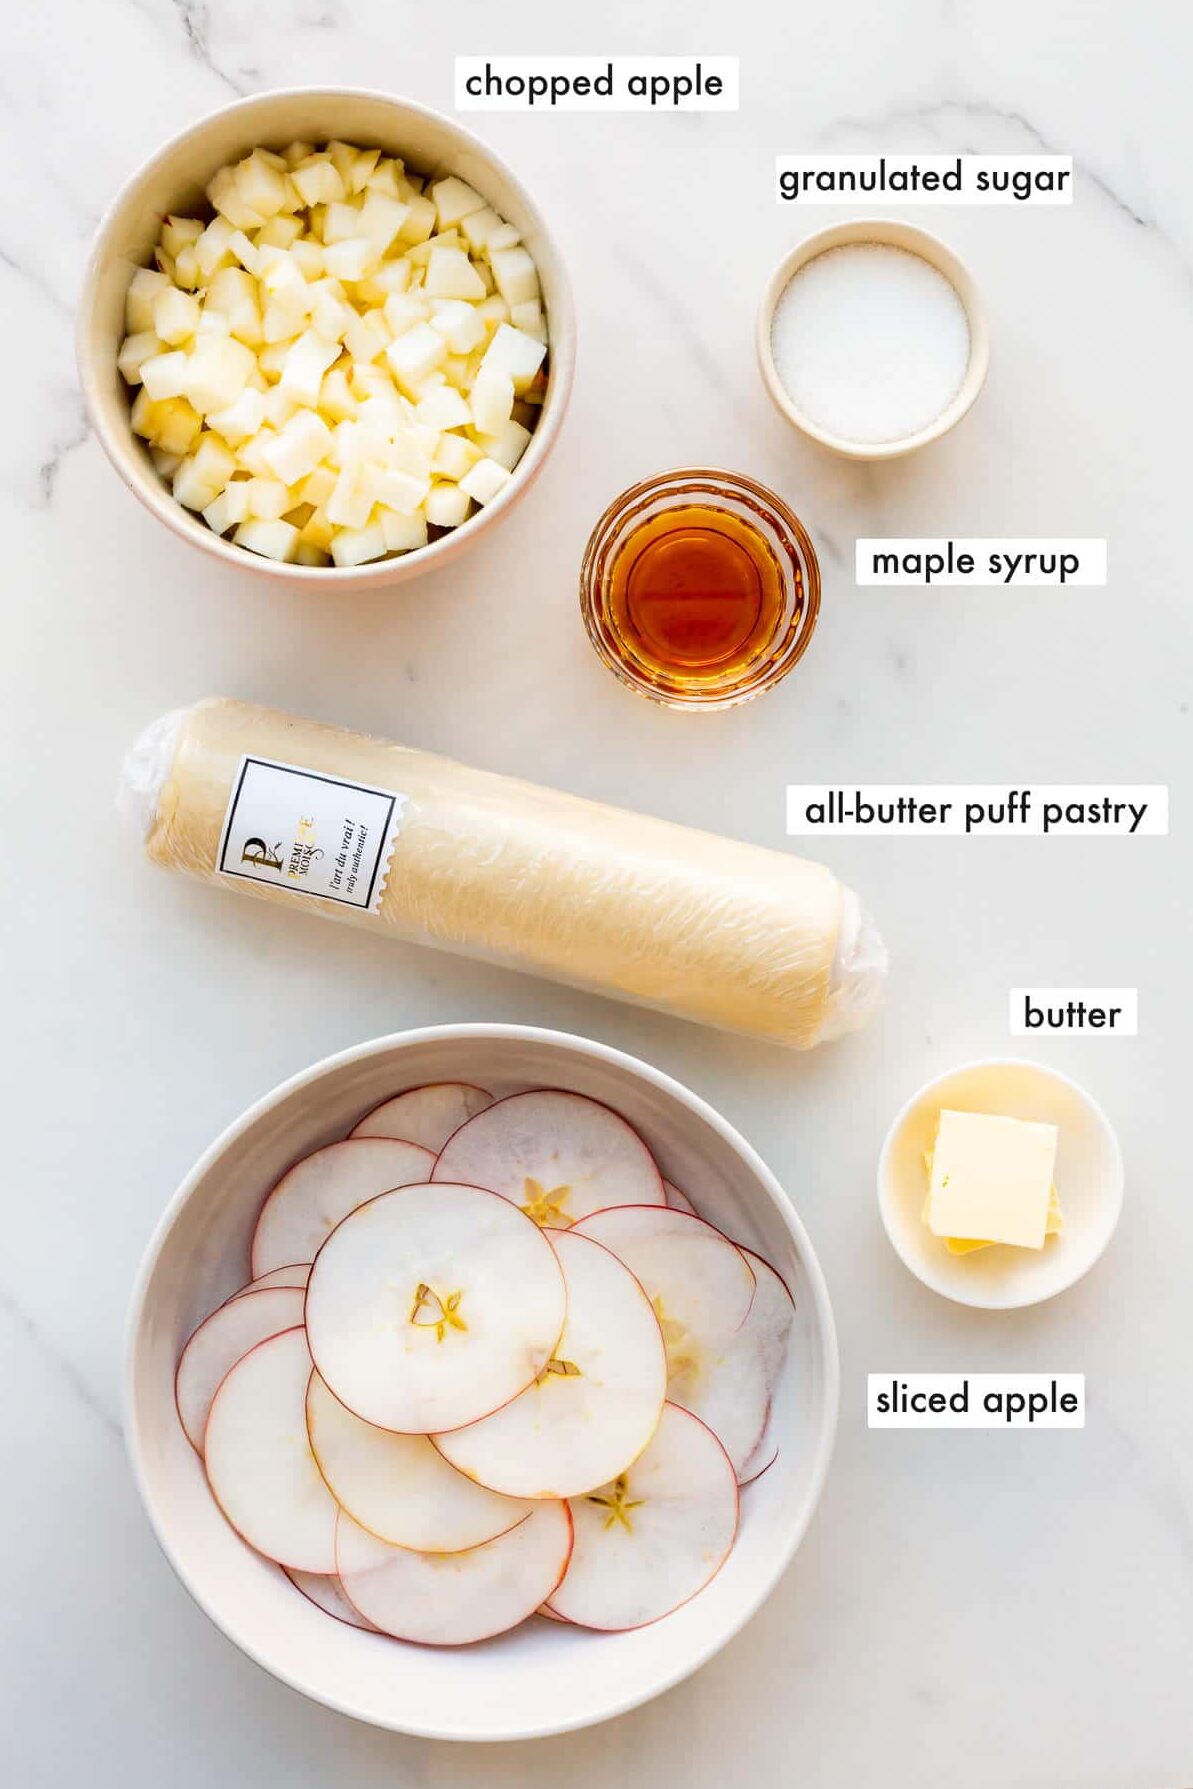 Ingredients to make a puff pastry apple tart, prepared and ready to be assembled.